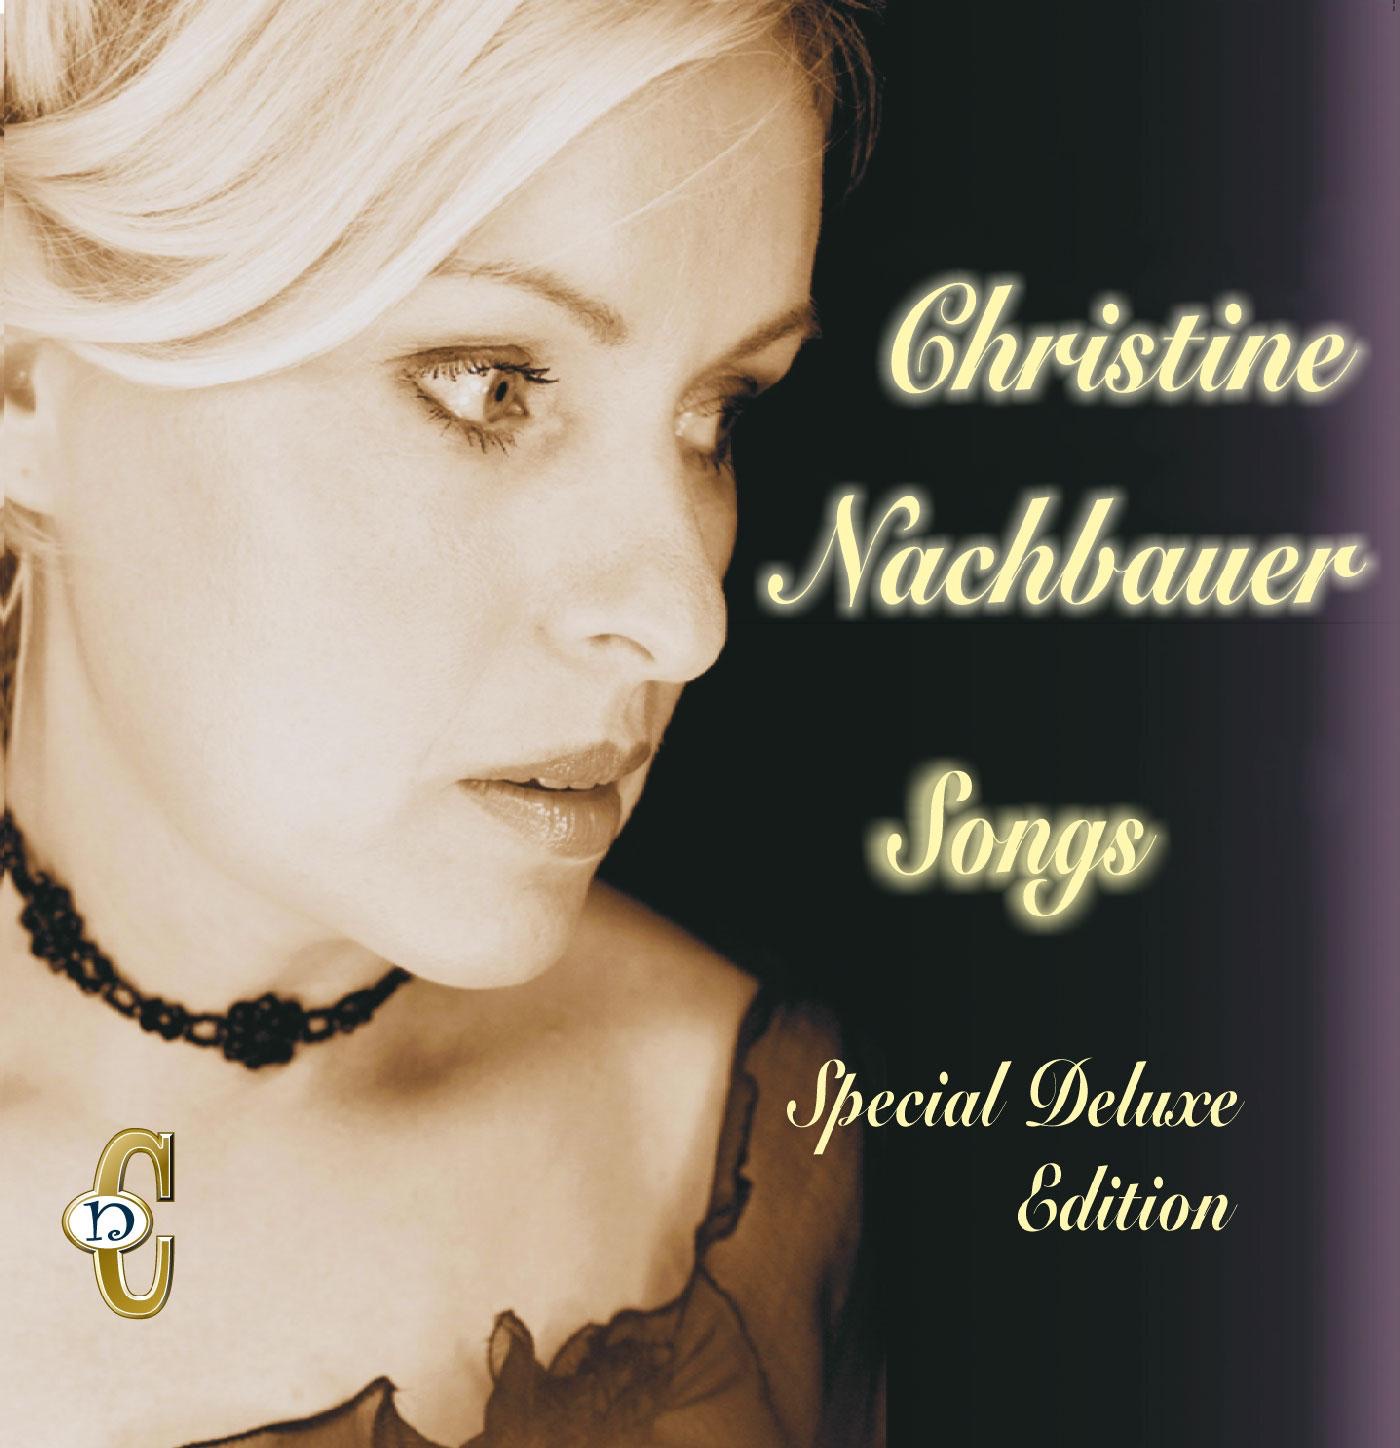 Songs &quot;Special Deluxe Edition&quot; Christine Nachbauer by Christine Nachbauer on iTunes - 1400x1448sr